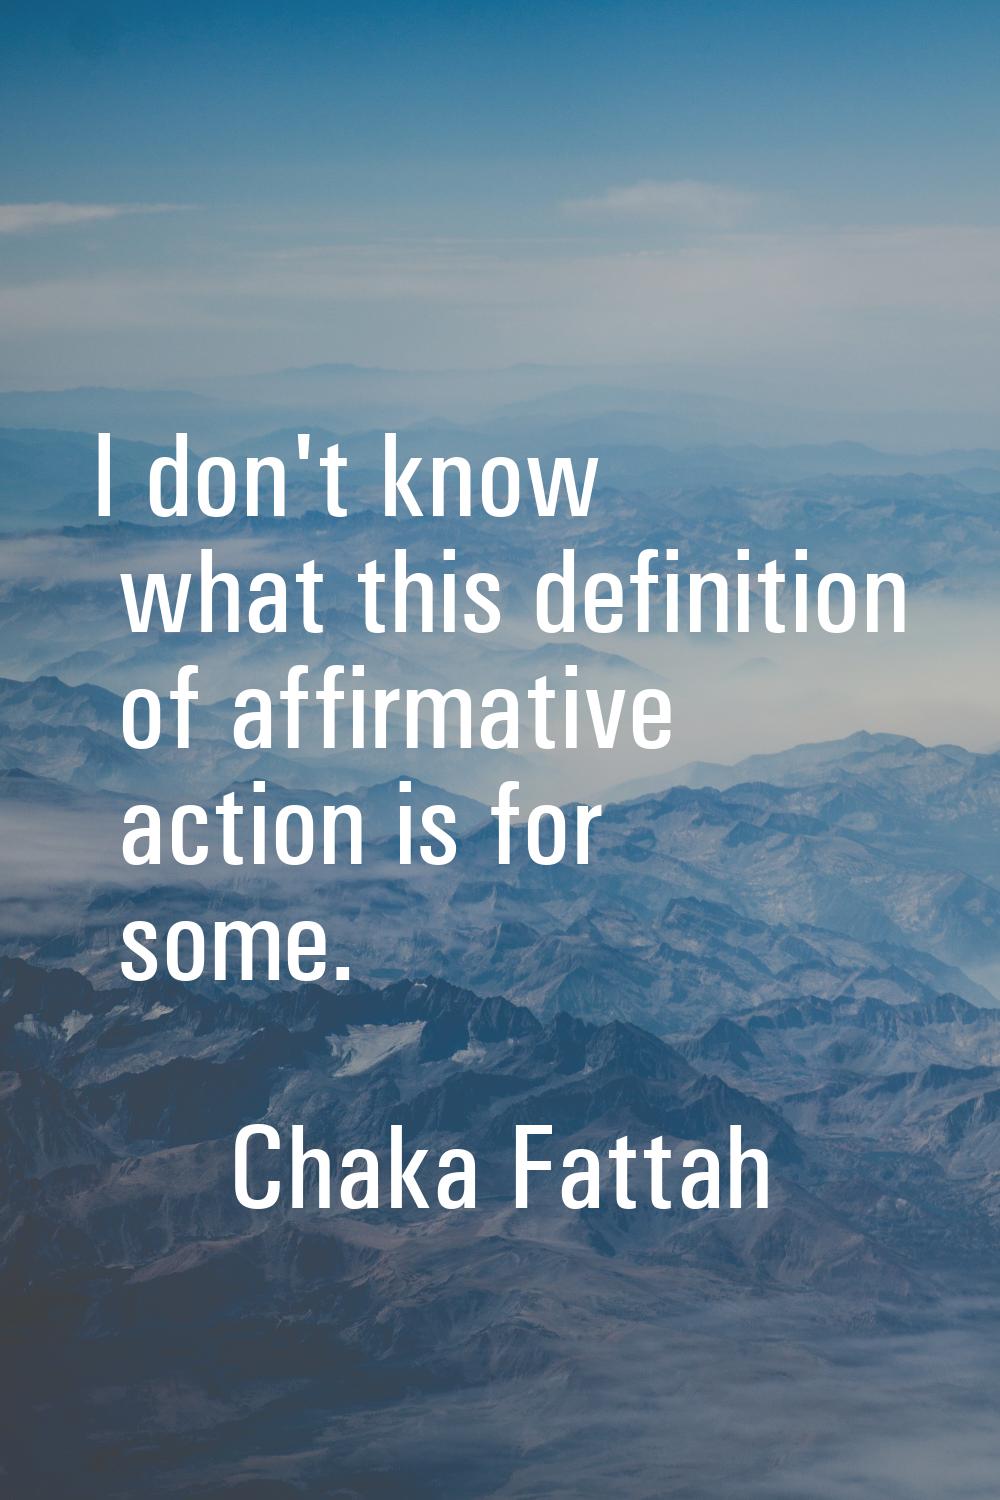 I don't know what this definition of affirmative action is for some.